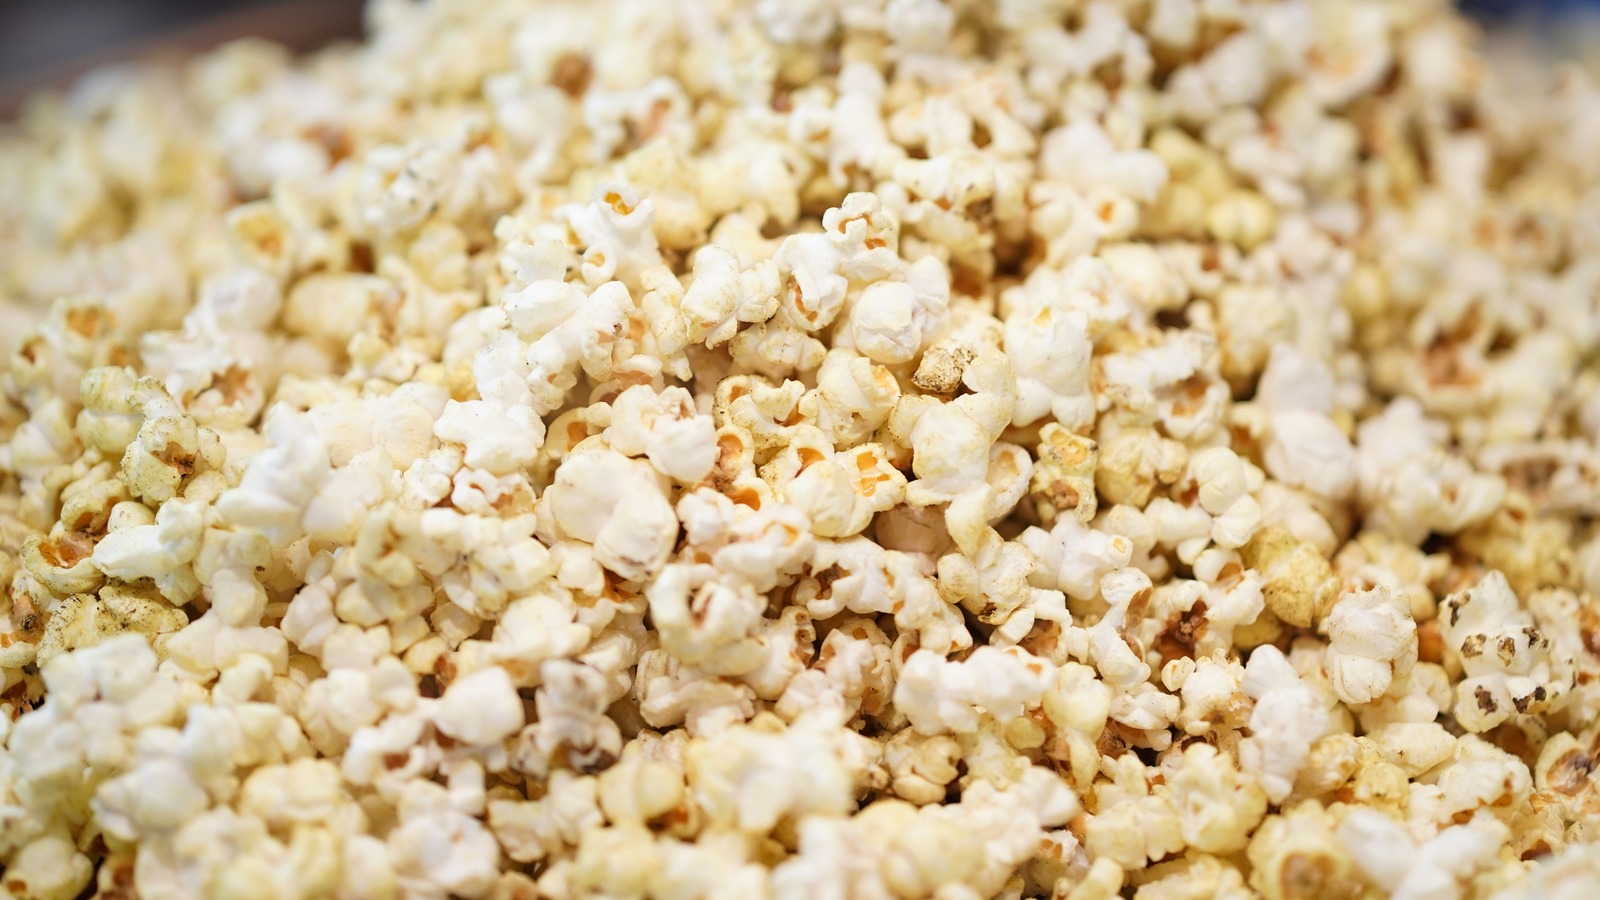 https://www.thedailymeal.com/img/gallery/the-tiktok-butter-hack-thatll-totally-upgrade-your-movie-theater-popcorn/l-intro-1682371104.jpg